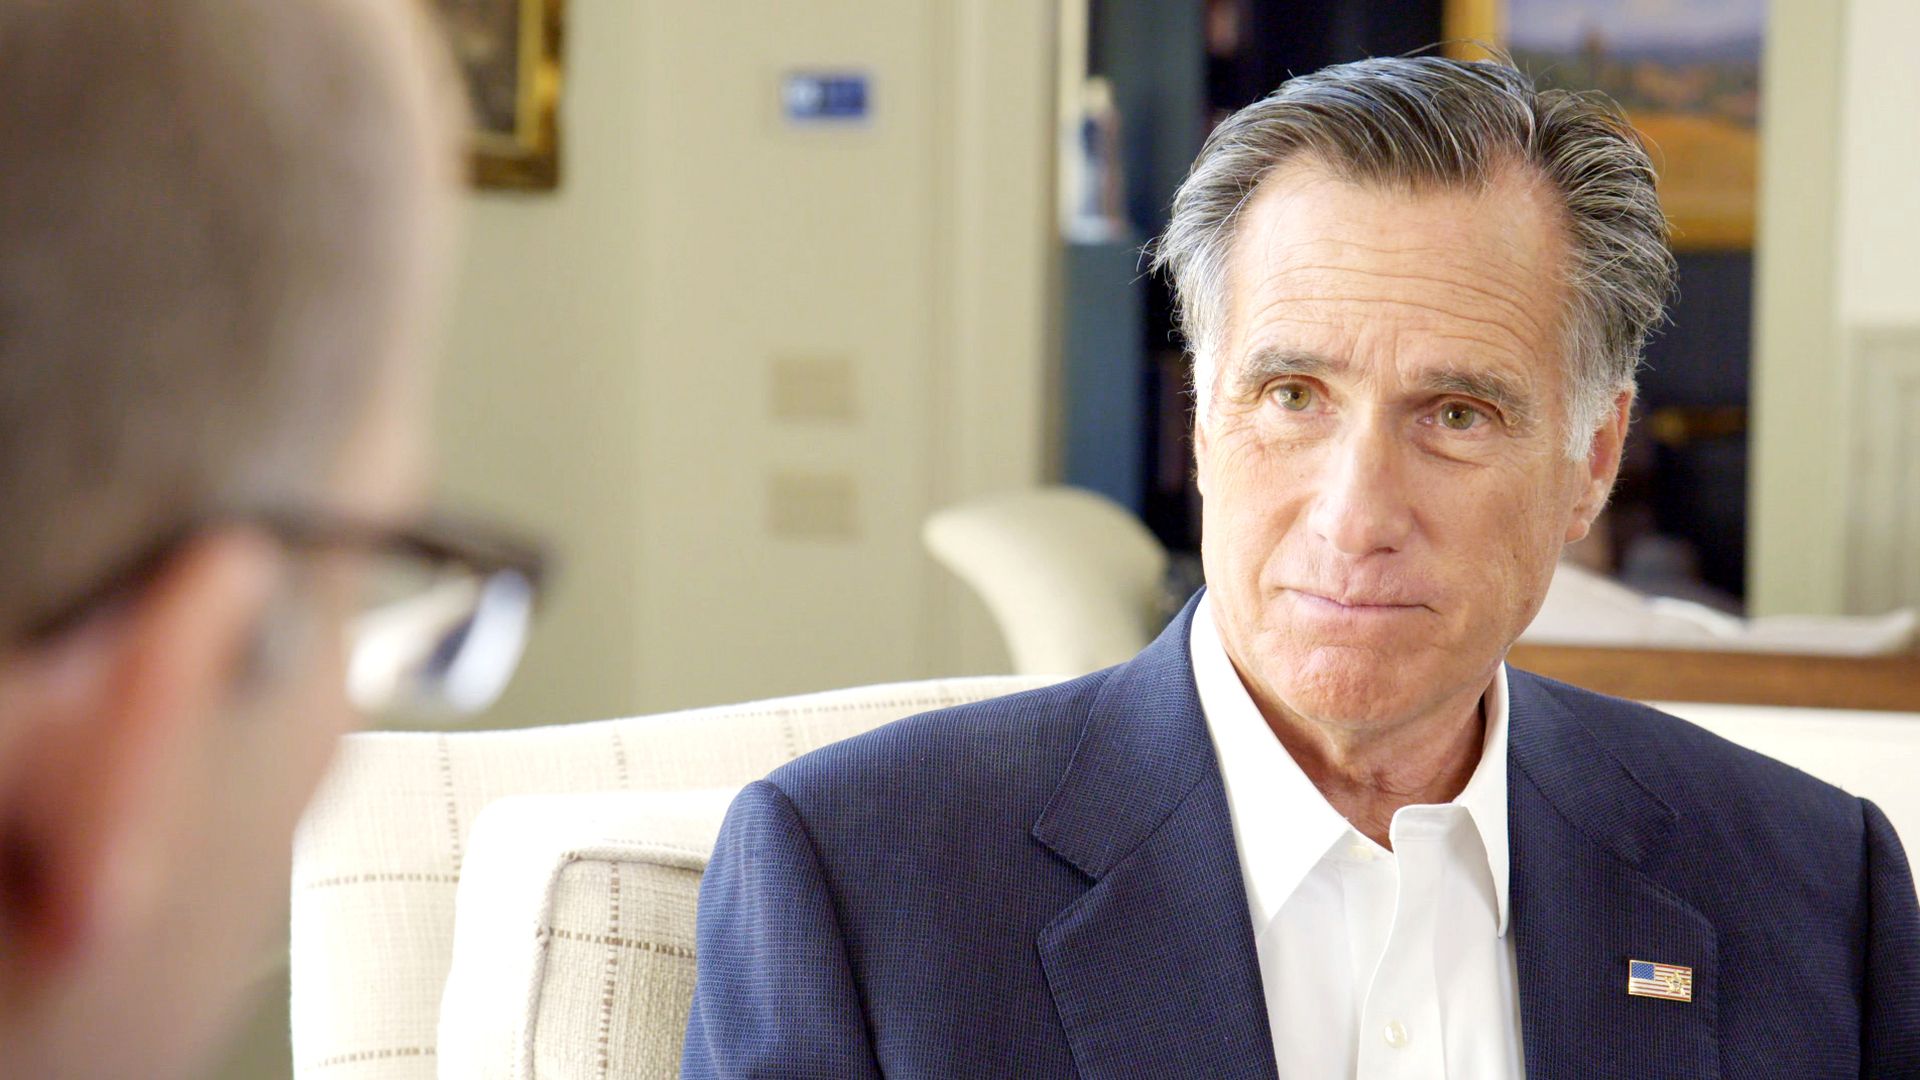 Mitt Romney faces Mike Allen in an interview for "Axios on HBO"